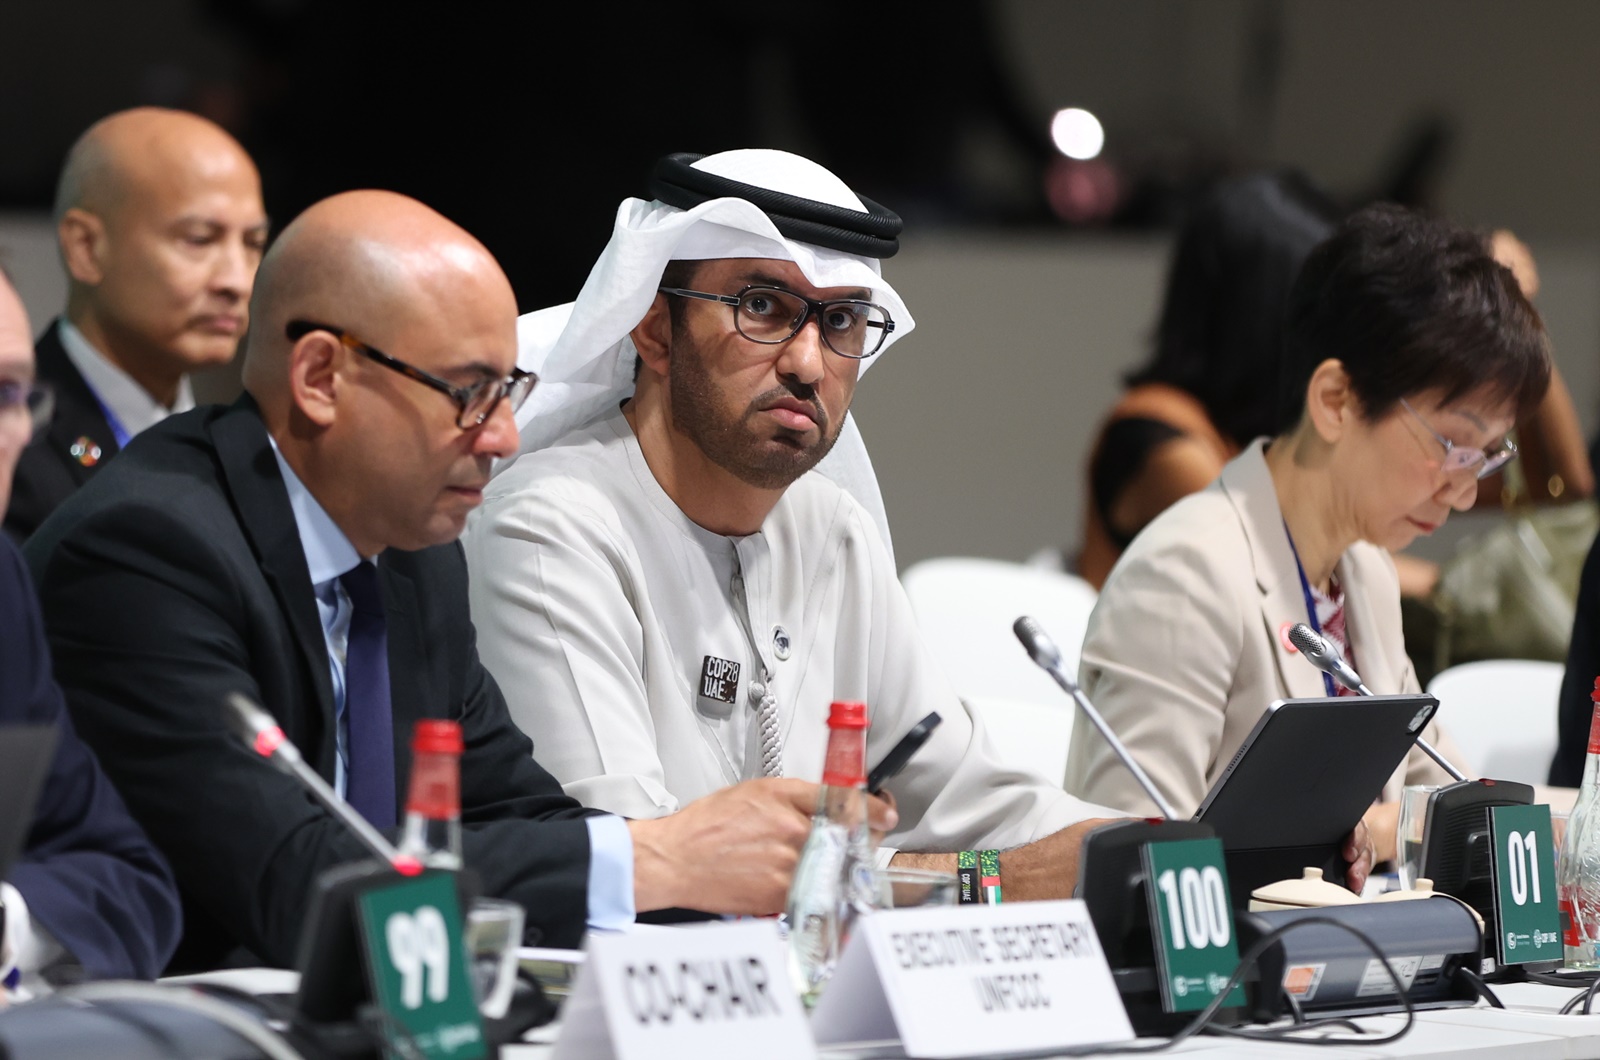 epa11018444 President-Designate of COP28, UAE's Climate Change Special Envoy and Managing Director and Group CEO of the Abu Dhabi National Oil Company (ADNOC), Dr. Sultan Ahmed Al Jaber (C) attends a session during the 2023 United Nations Climate Change Conference (COP28) in Dubai, UAE, 09 December 2023. COP28 runs from 30 November to 12 December, and is expected to host one of the largest number of participants in the annual global climate conference as over 70,000 estimated attendees, including the member states of the UN Framework Convention on Climate Change (UNFCCC), business leaders, young people, climate scientists, Indigenous Peoples and other relevant stakeholders will attend.  EPA/ALI HAIDER